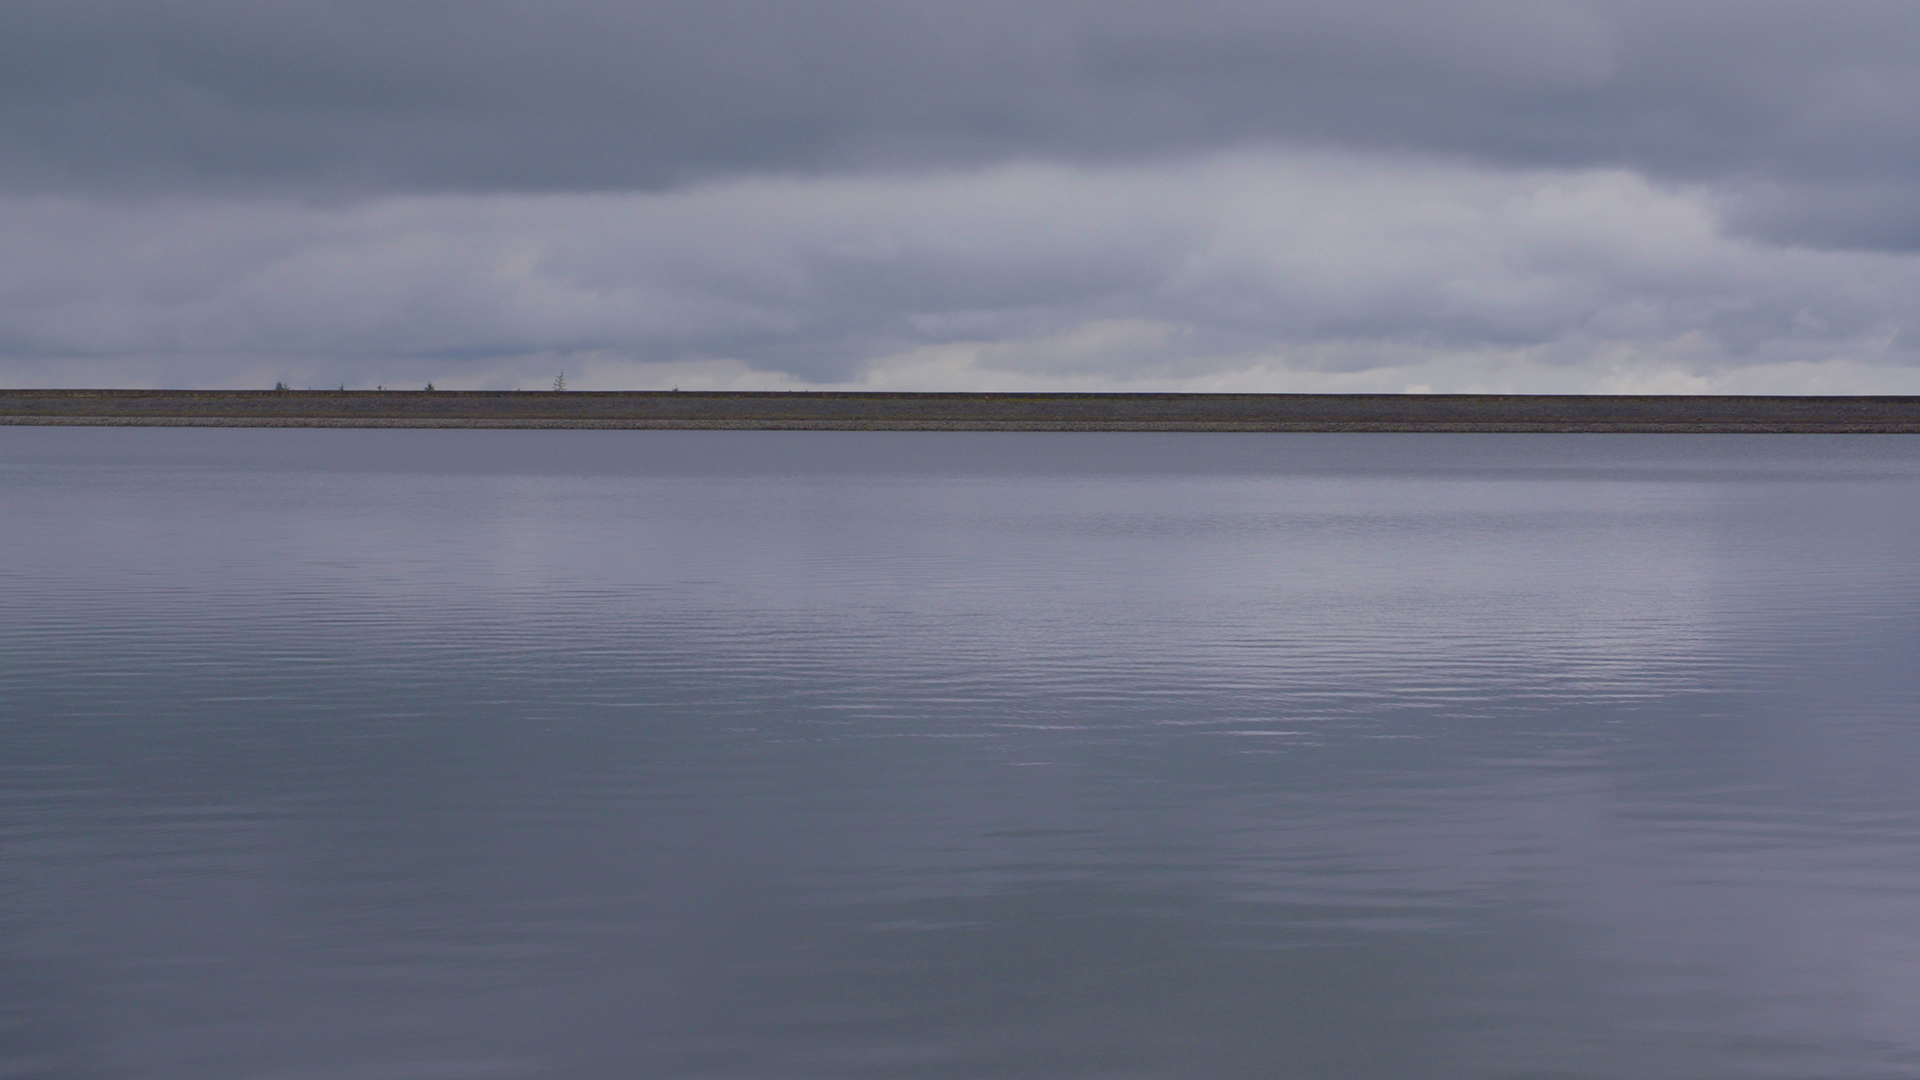 A photograph of a reservoir meeting the horizon. The sky is overcast.